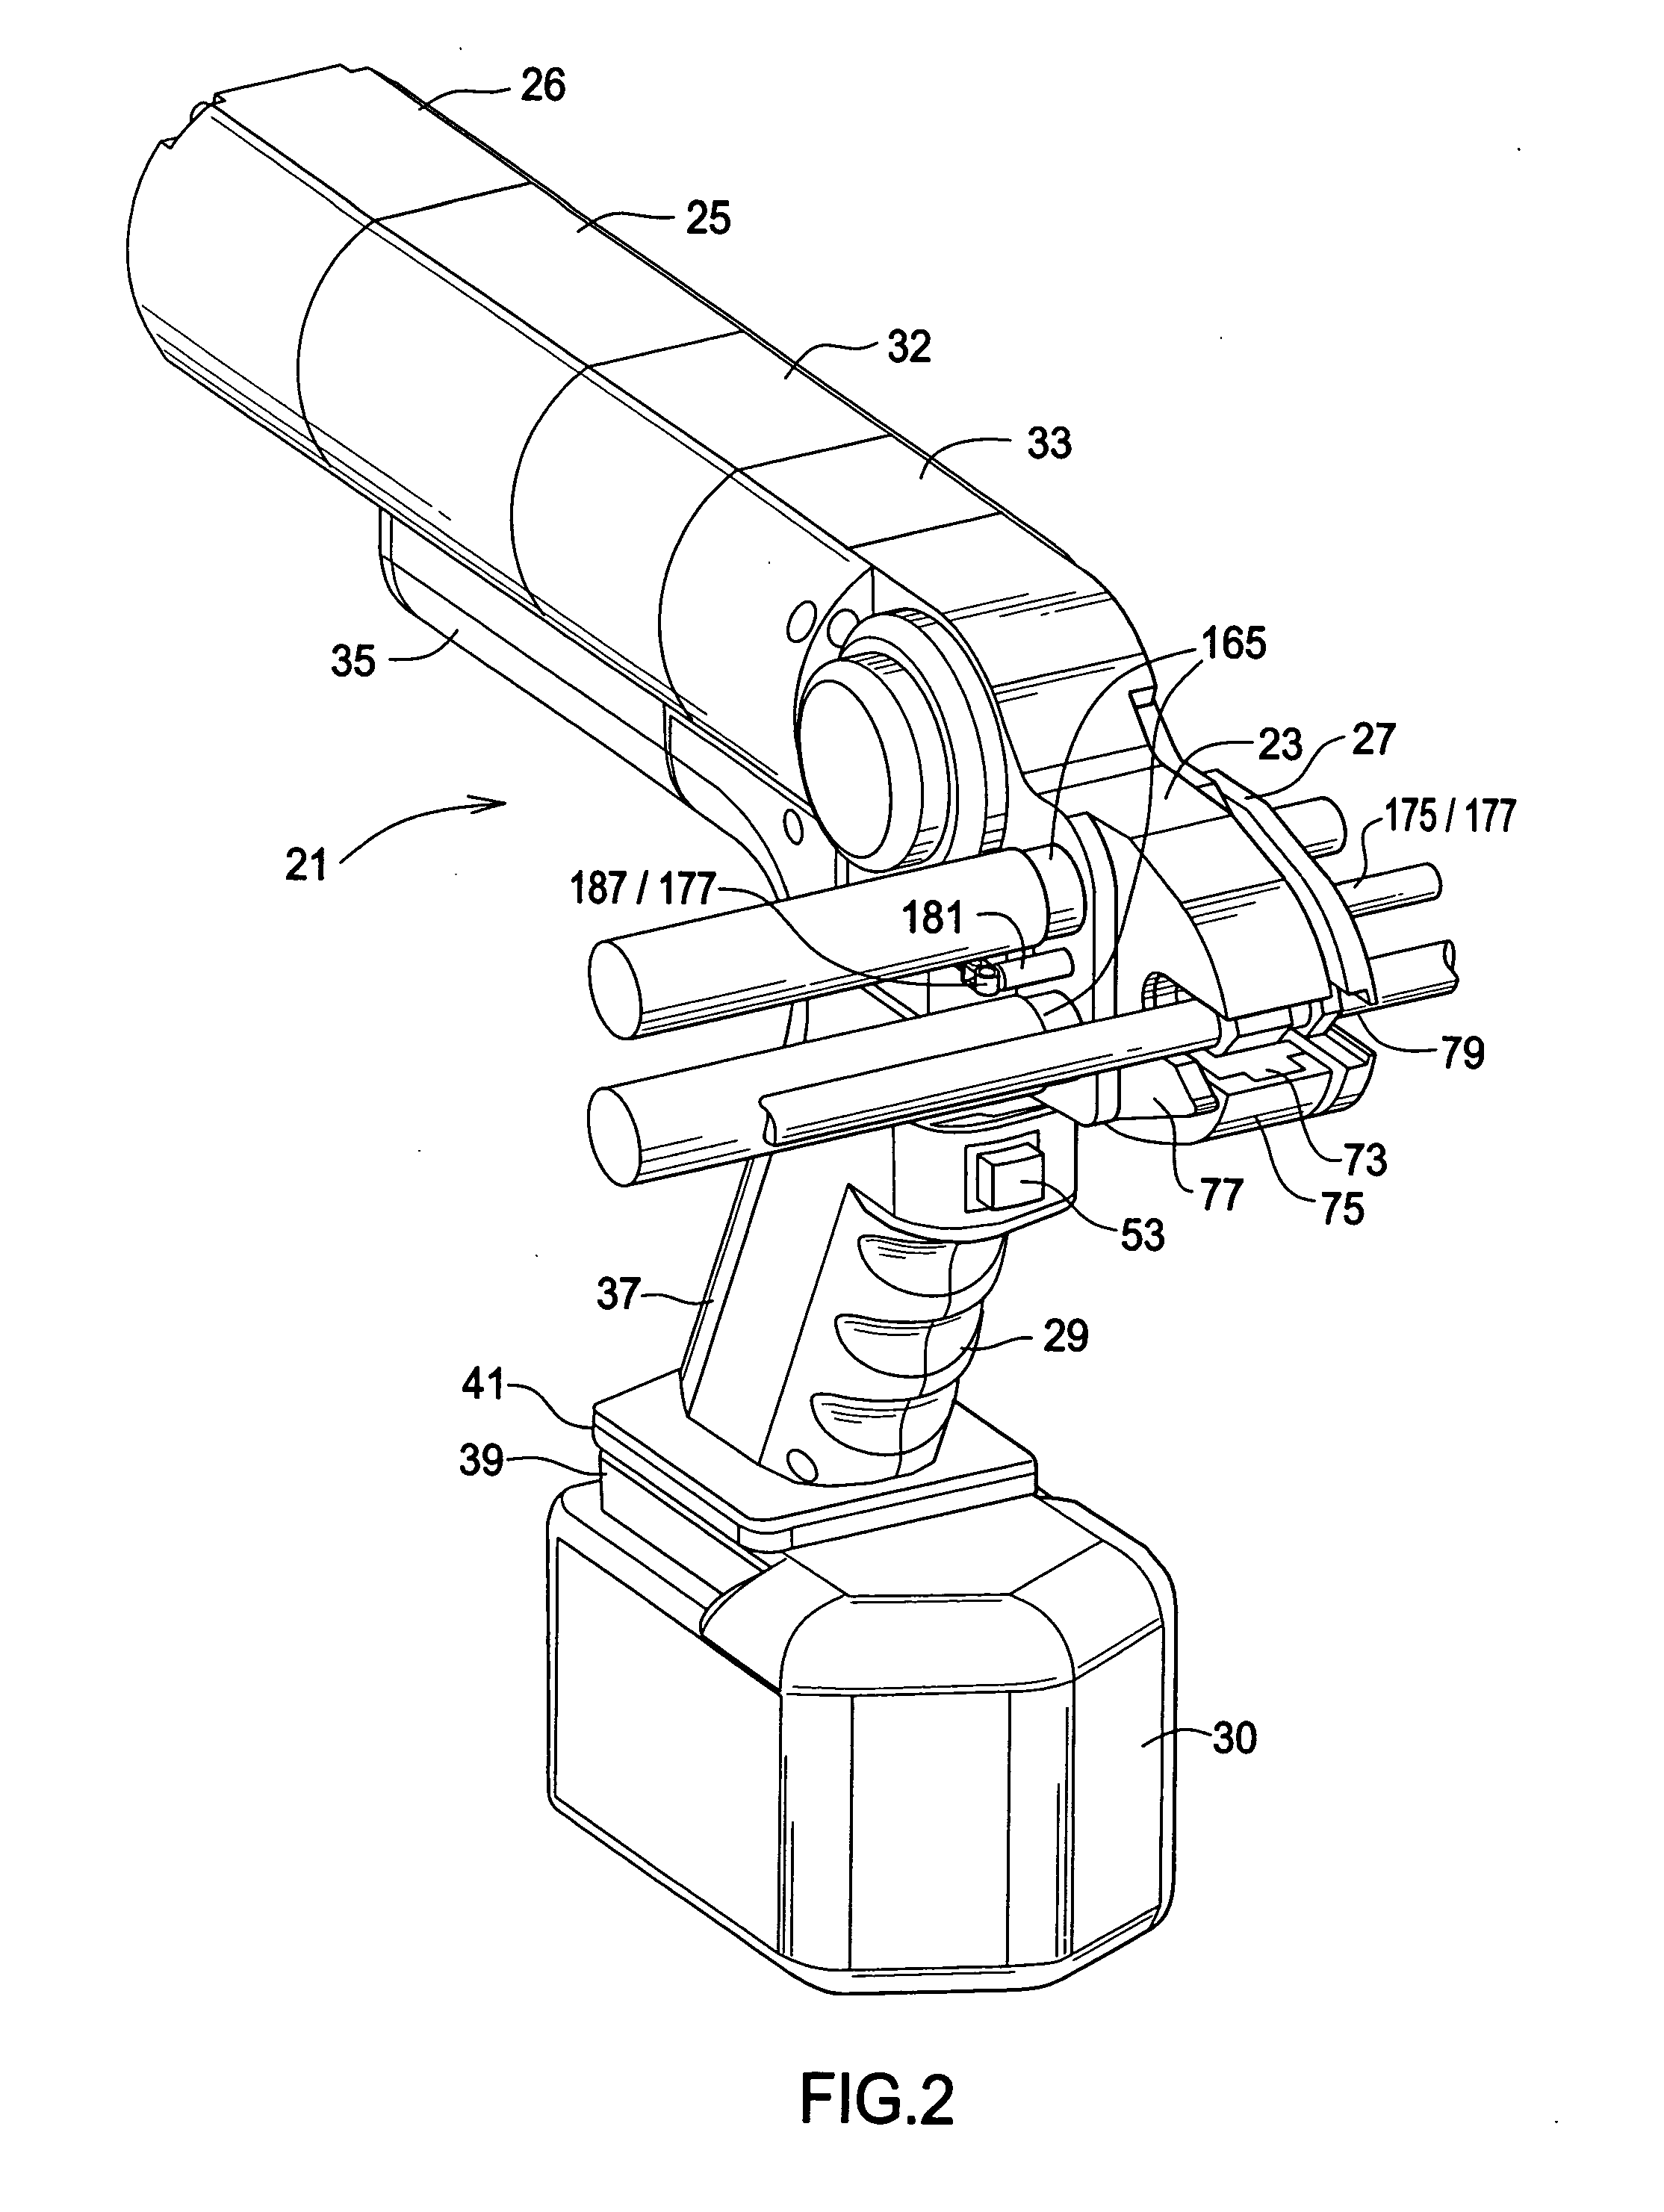 Drive engagement, safety and control apparatus for a powered connector driver